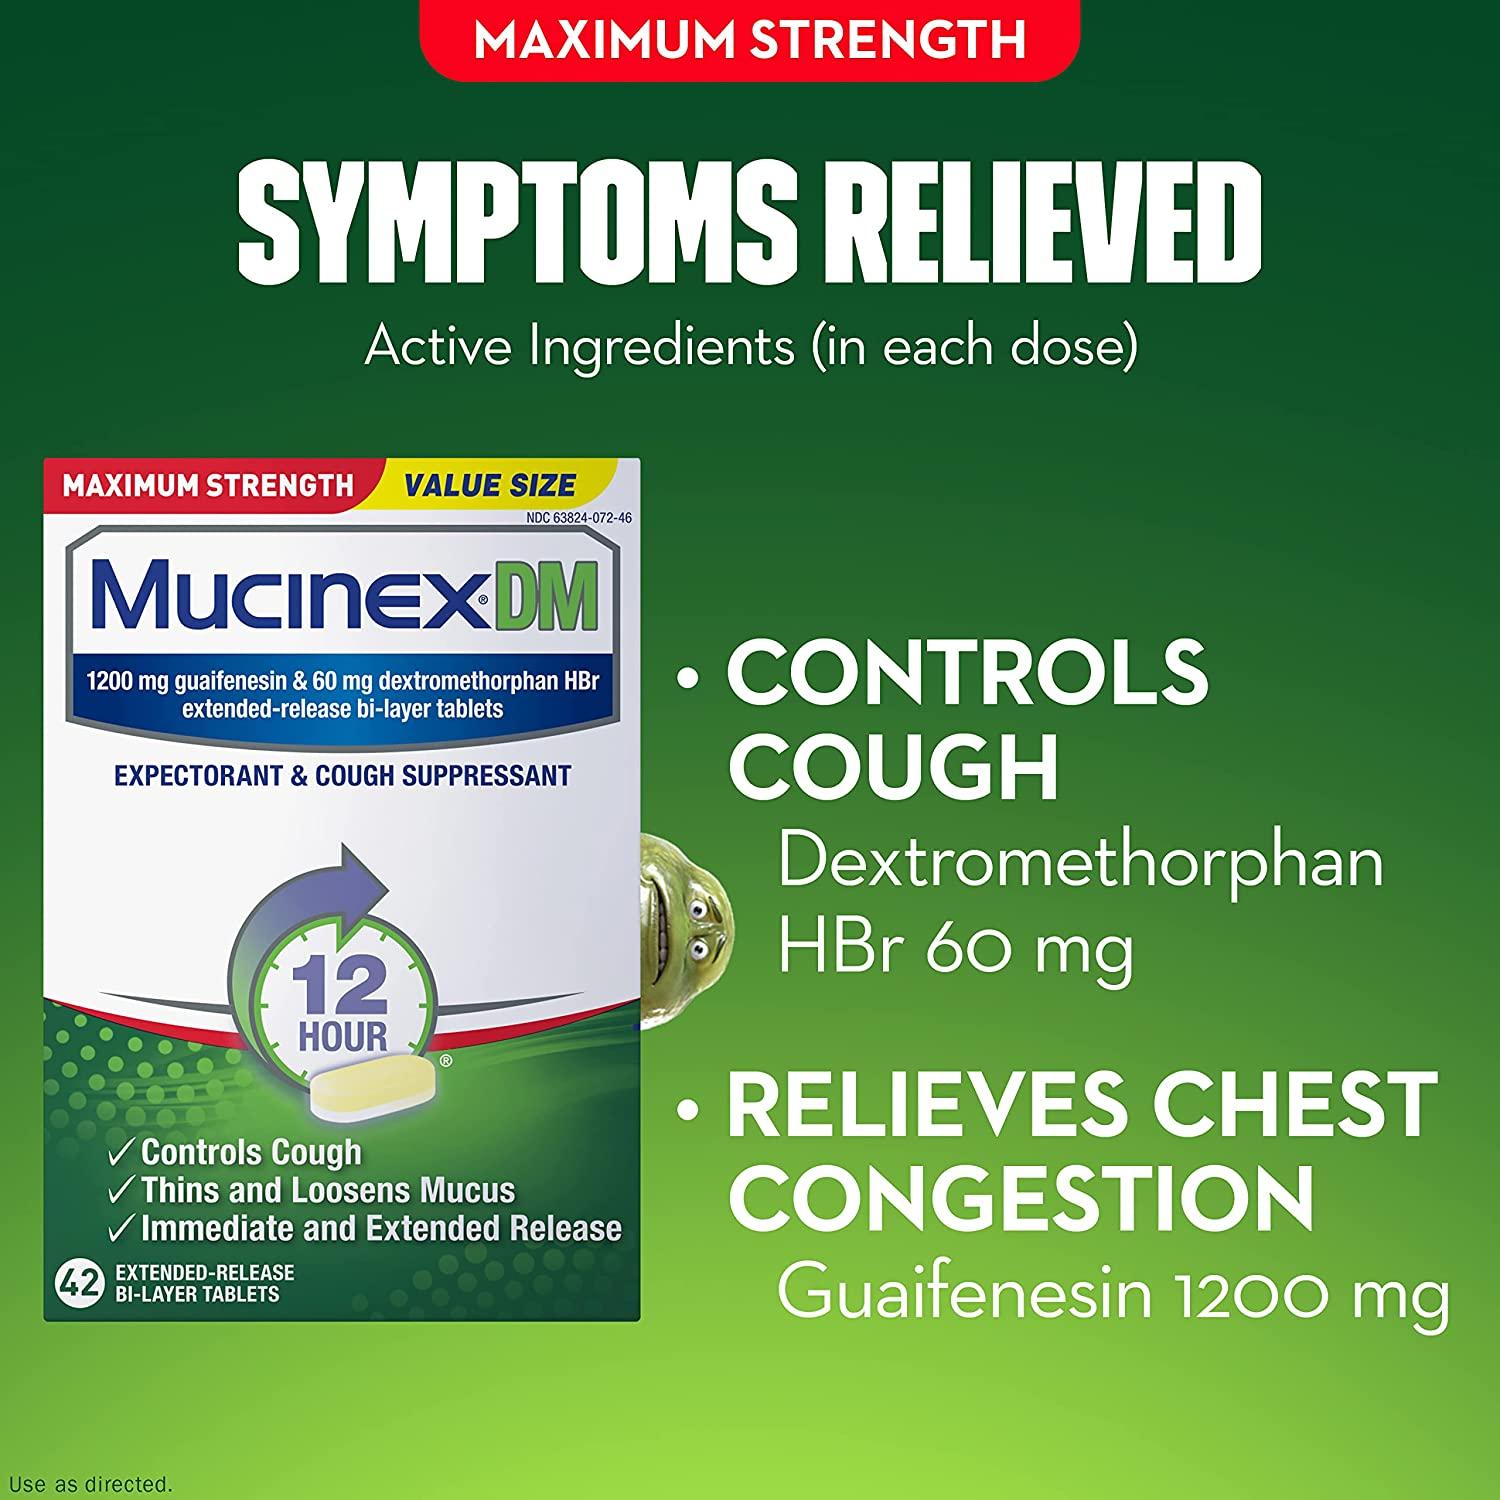 Cough Suppressant And Expectorant Mucinex Dm Maximum Strength 12 Hourtablets 42ct 1200 Mg